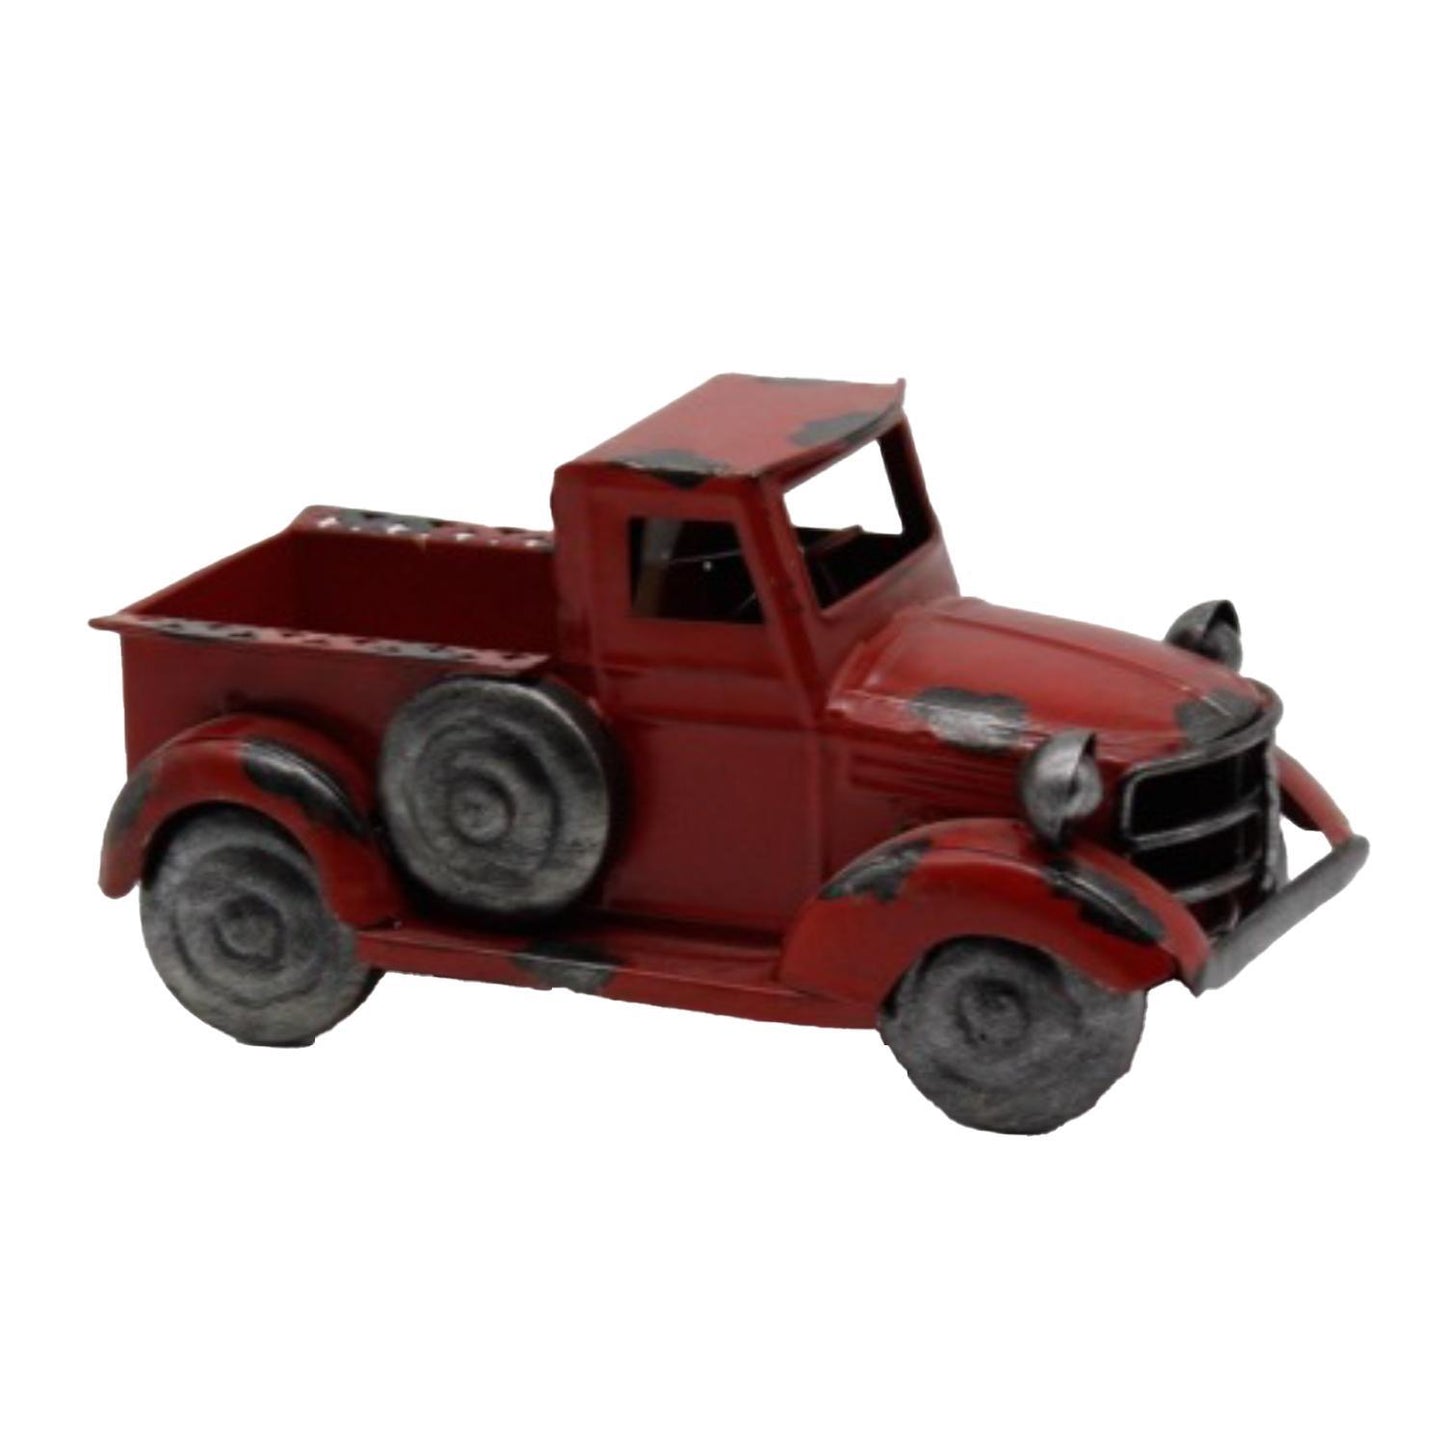 Small Red Truck